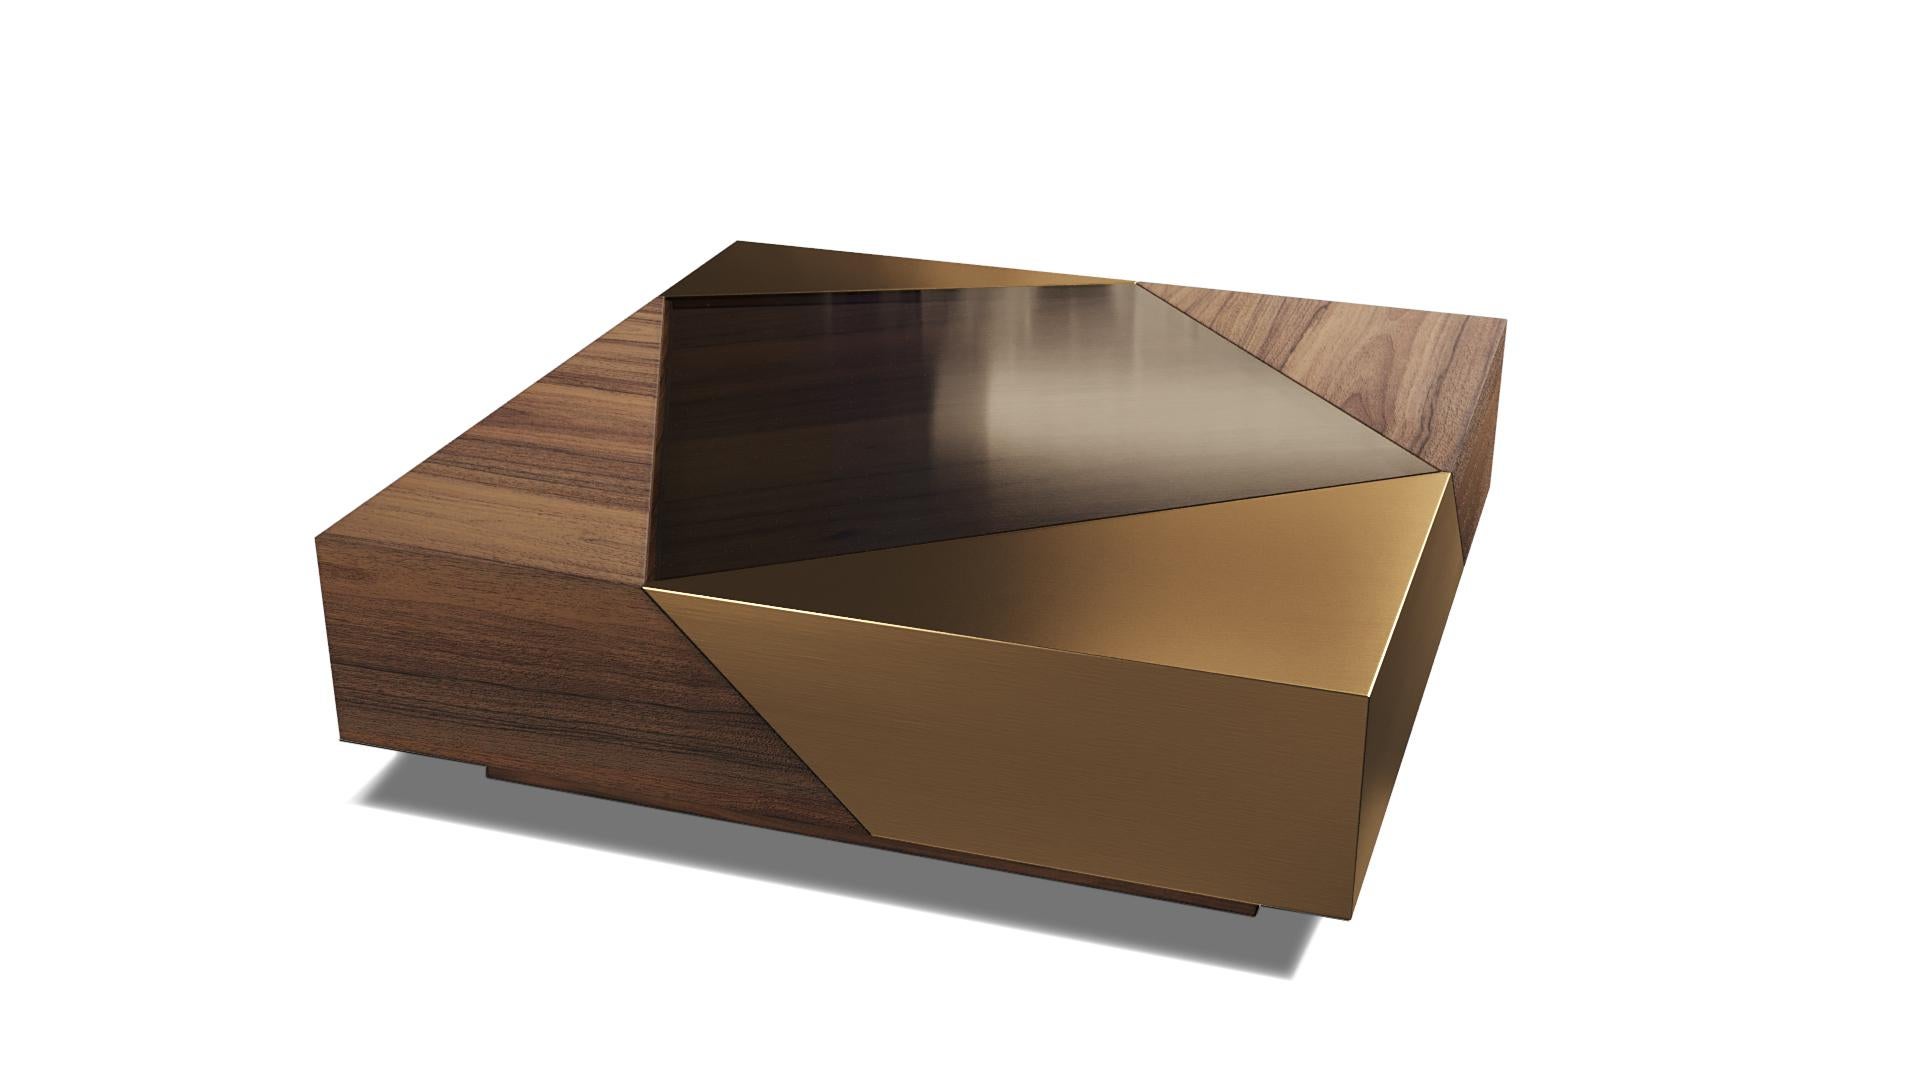 CY Tao cocktail table is inspired by the postmodern design aesthetics and commands attention with its unique combination of 3 different materials: Bronze Glass, Stained Walnut in Satin Finish and Bronze Chemetal. A recessed metal base creates the